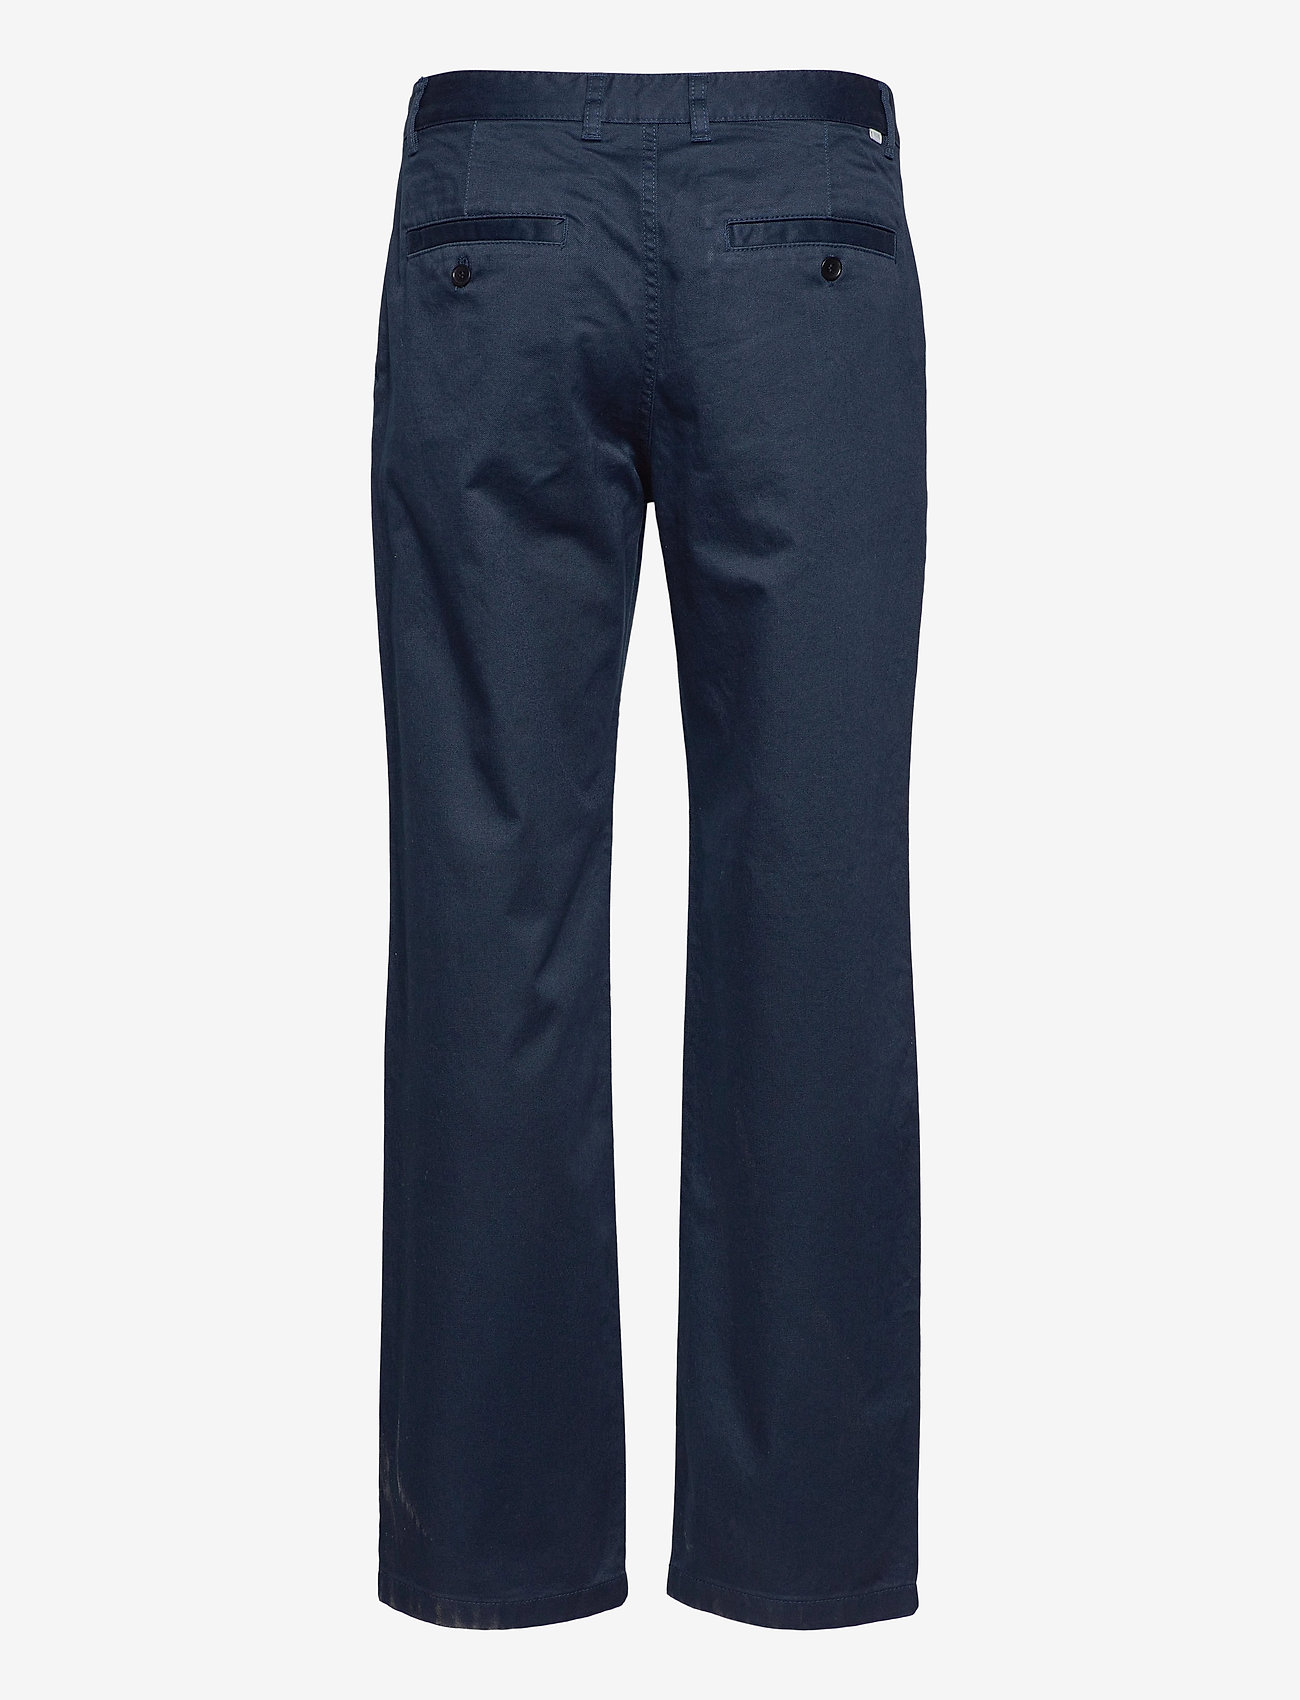 Wood Wood - Stefan classic trousers - chinos - navy - 1